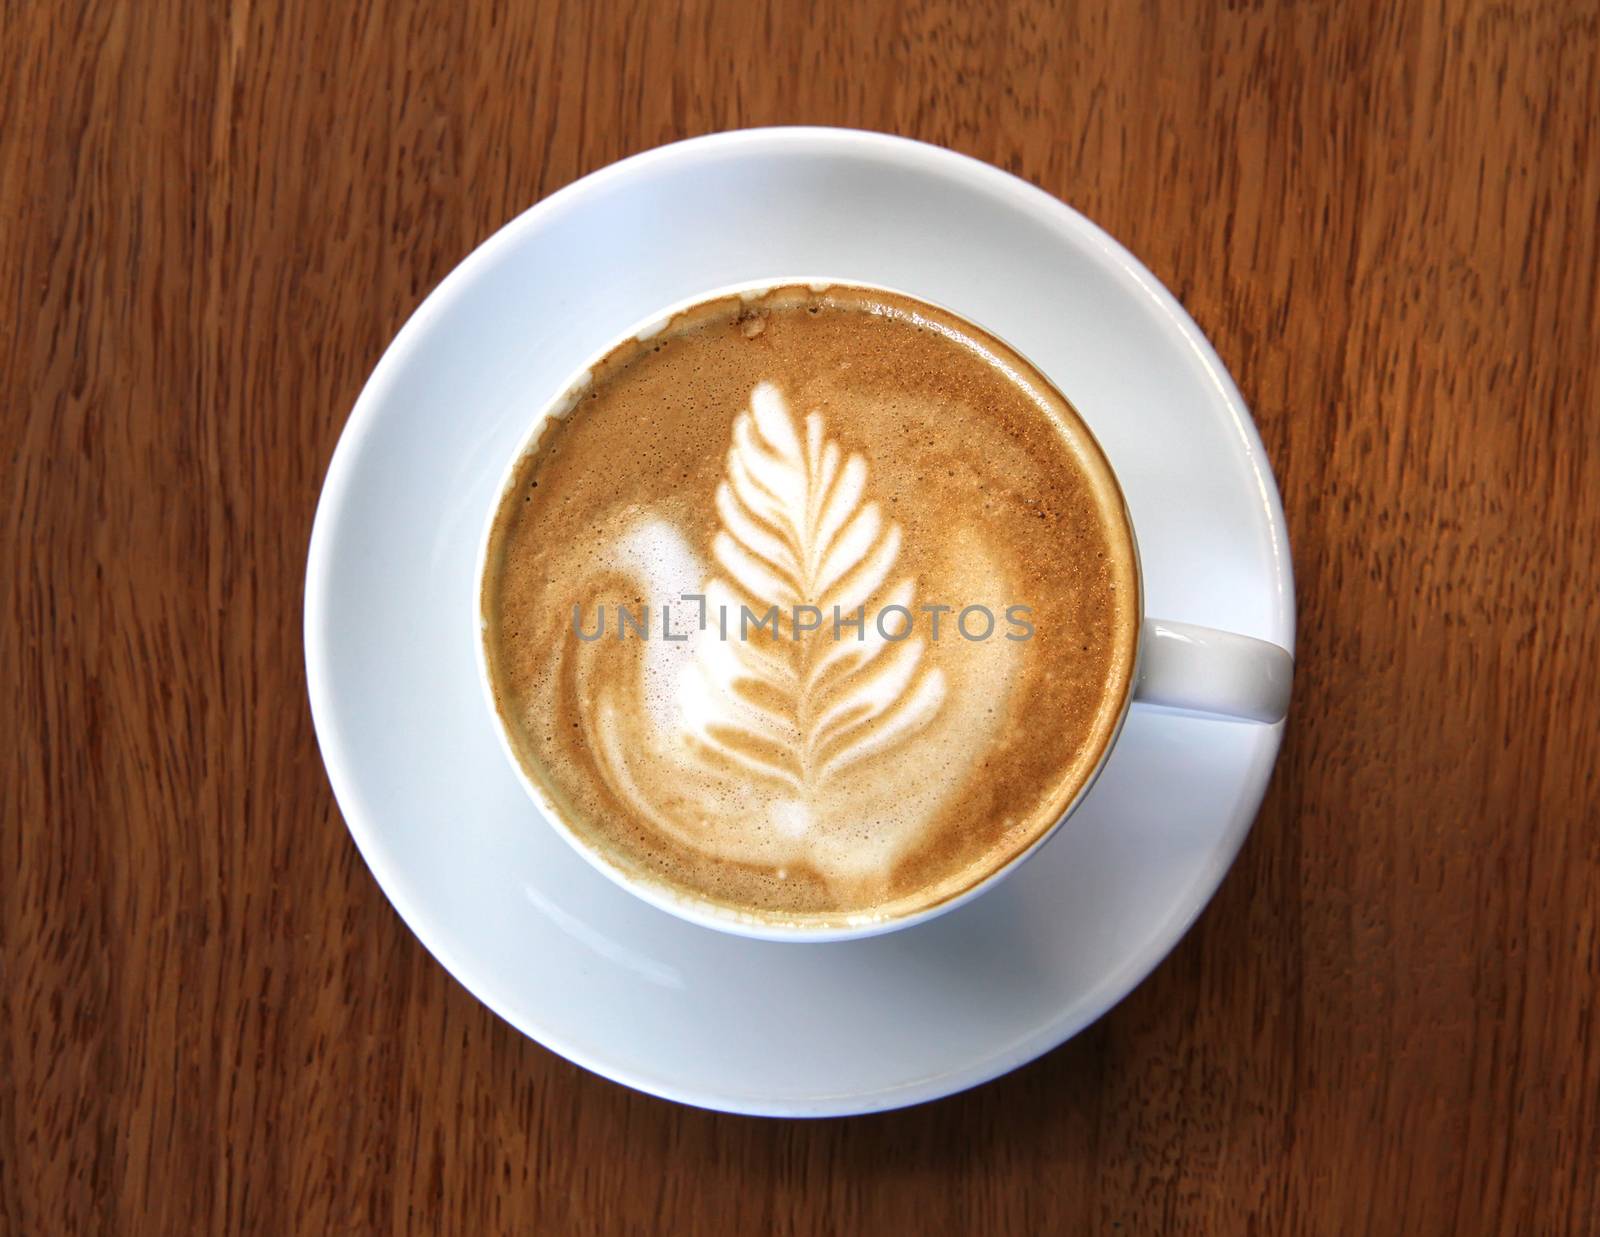 Cup of coffee latte with leaf design art in froth, on a wooden table and viewed from top.